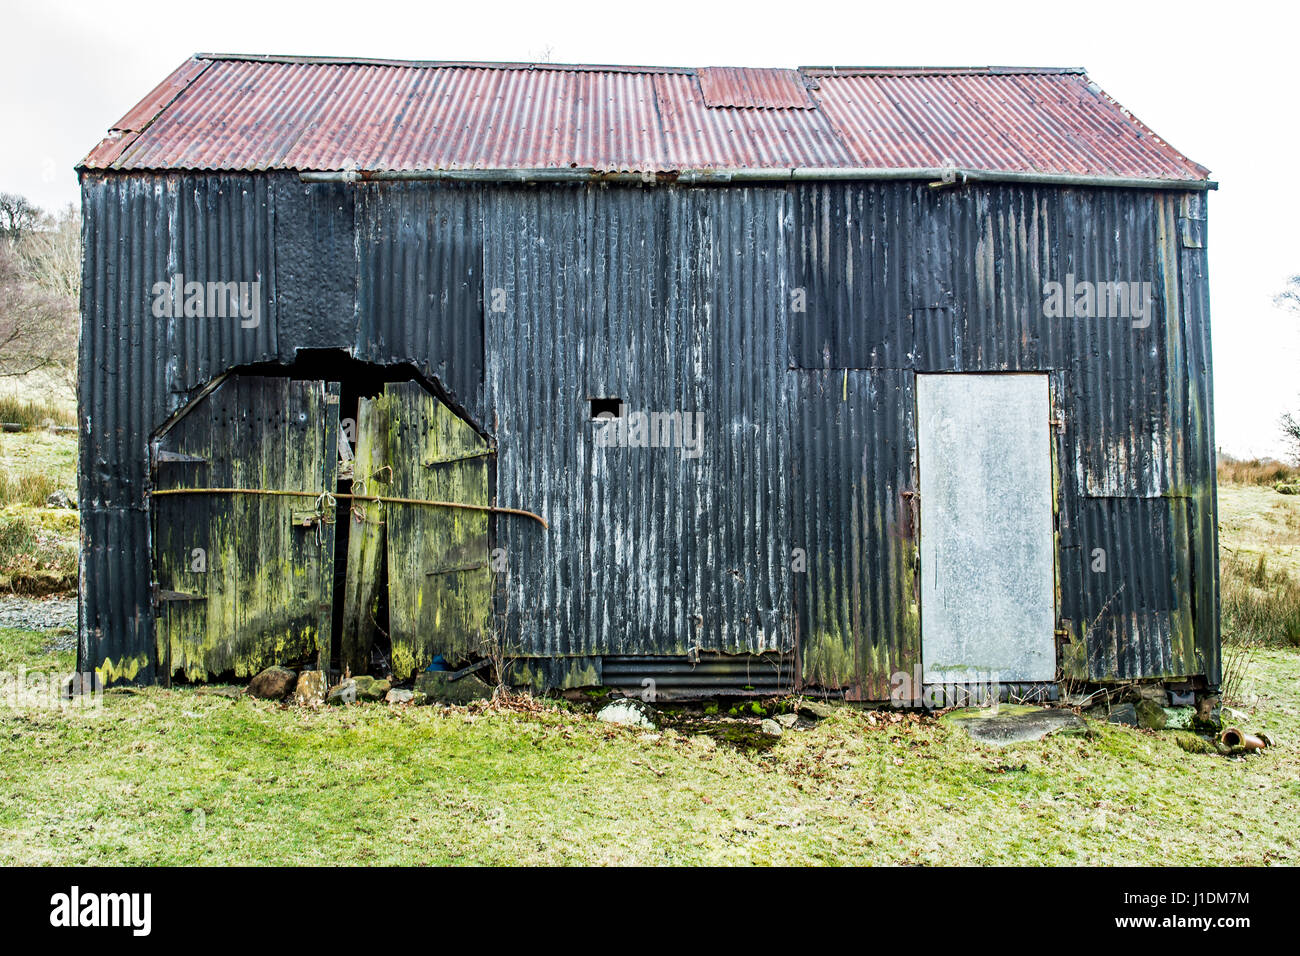 Old dilapidated corrugated metal barn in the welsh hills. Stock Photo